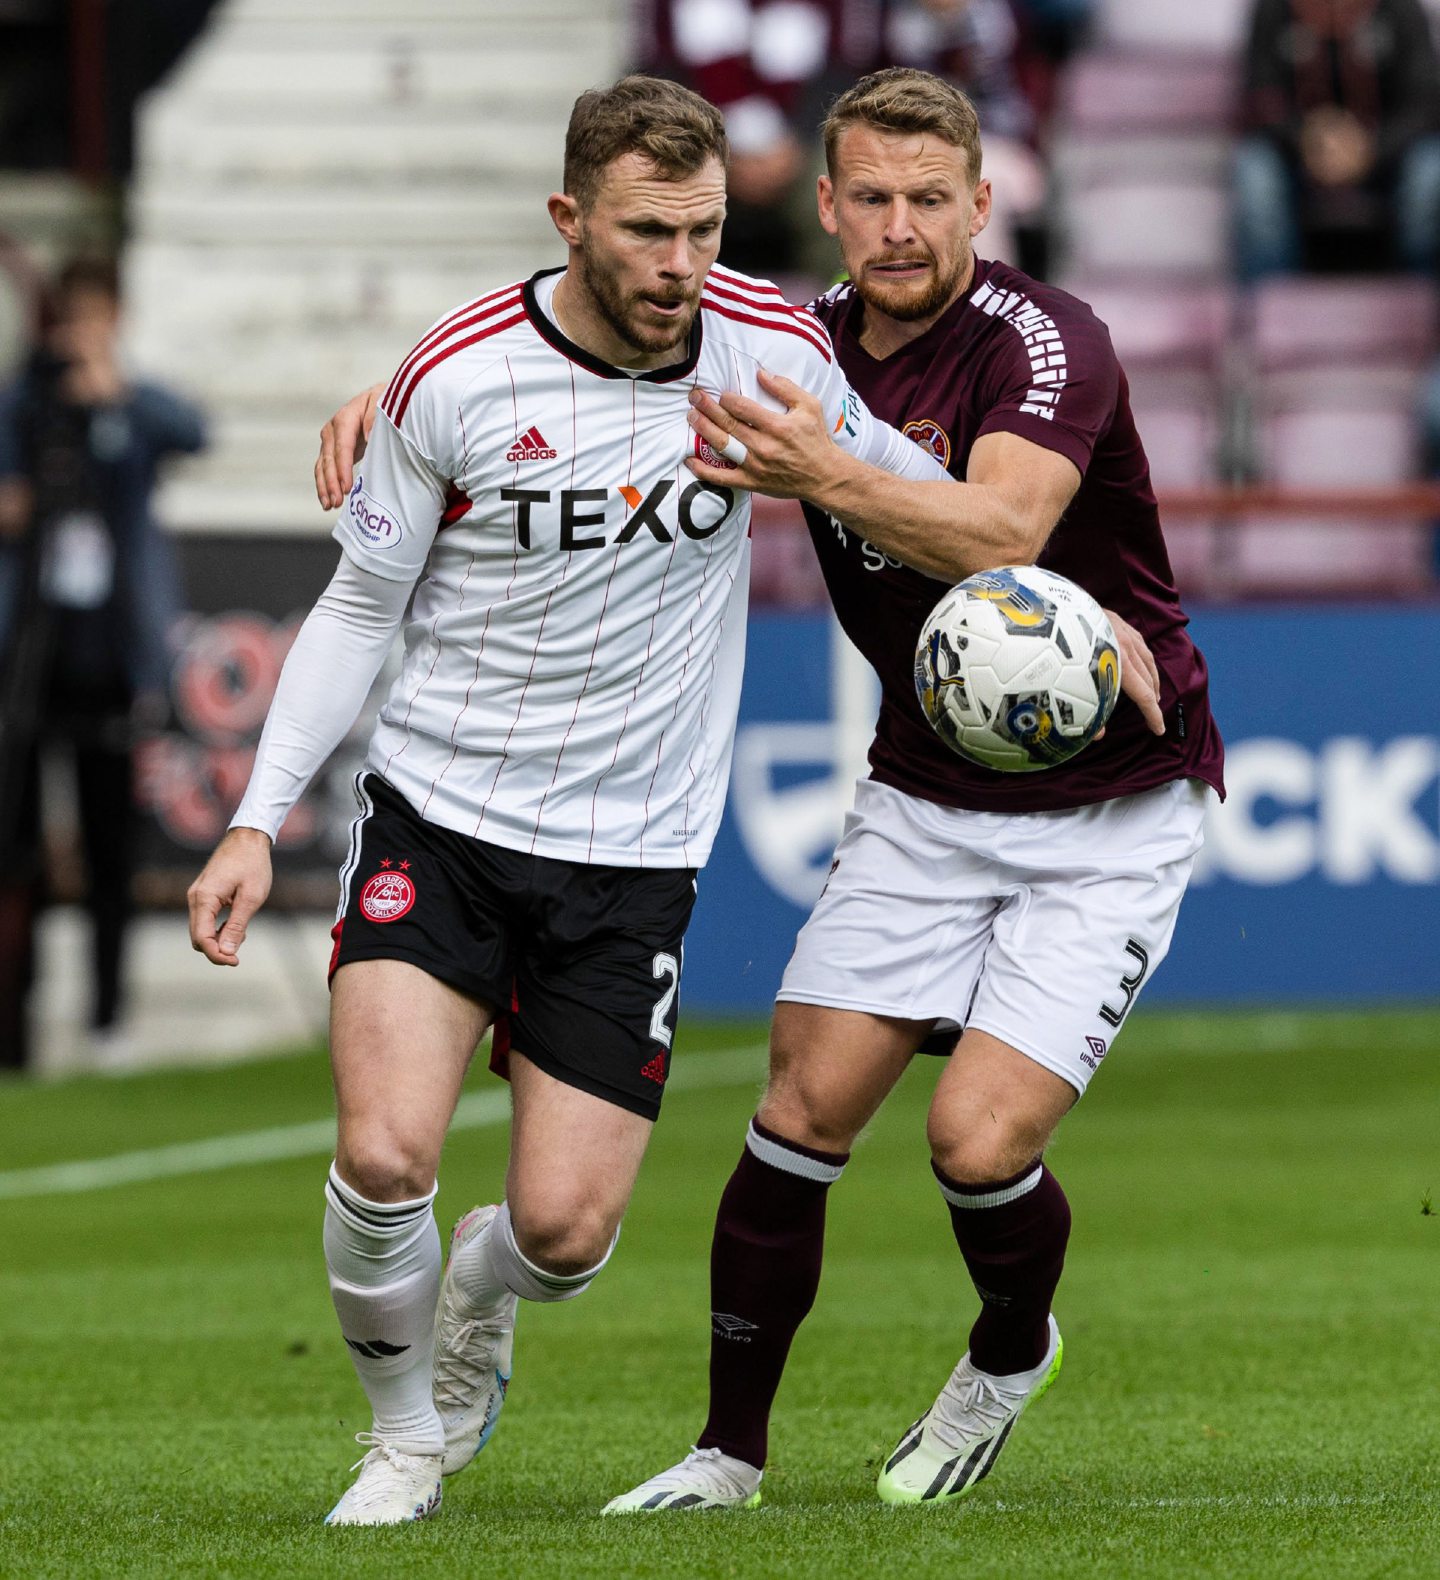 Aberdeen's Nicky Devlin and Hearts' Stephen Kingsley in action